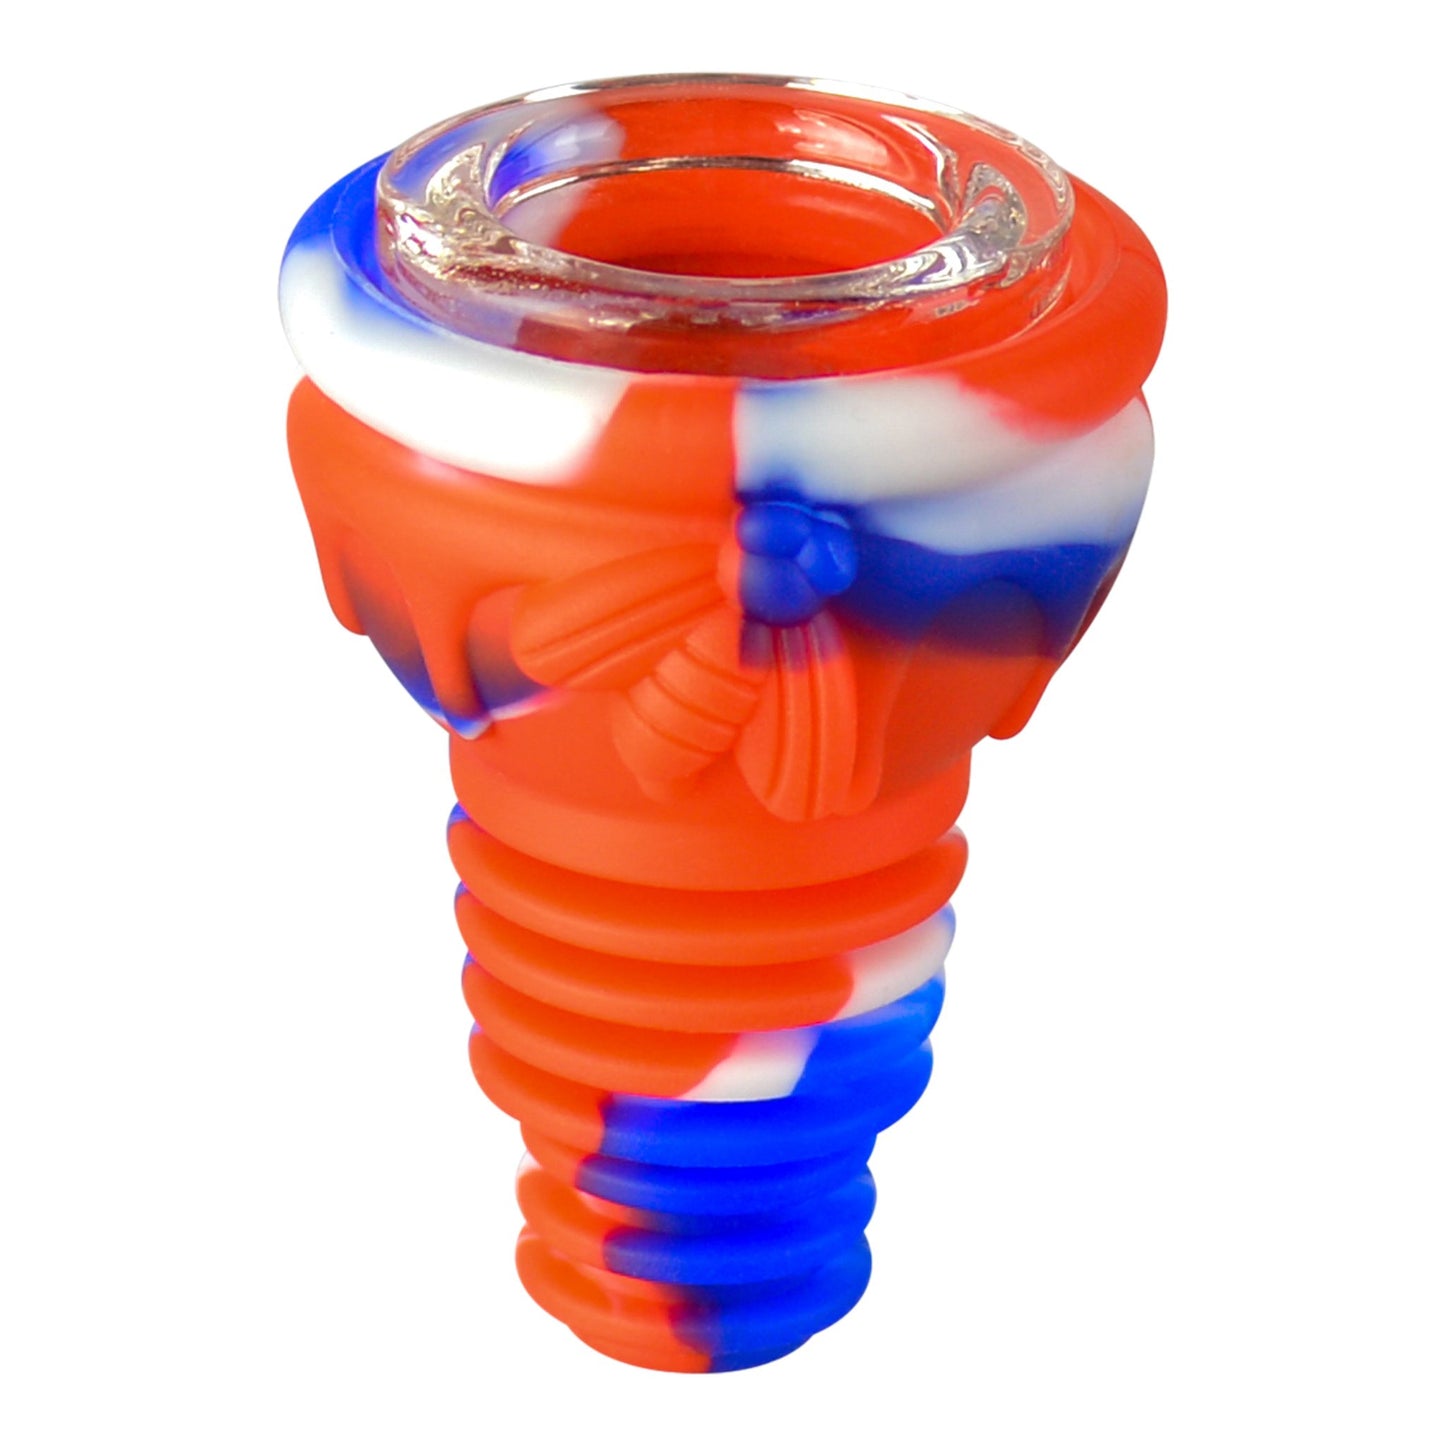 Honeybee Silicone Bowl - Male Red / Blue